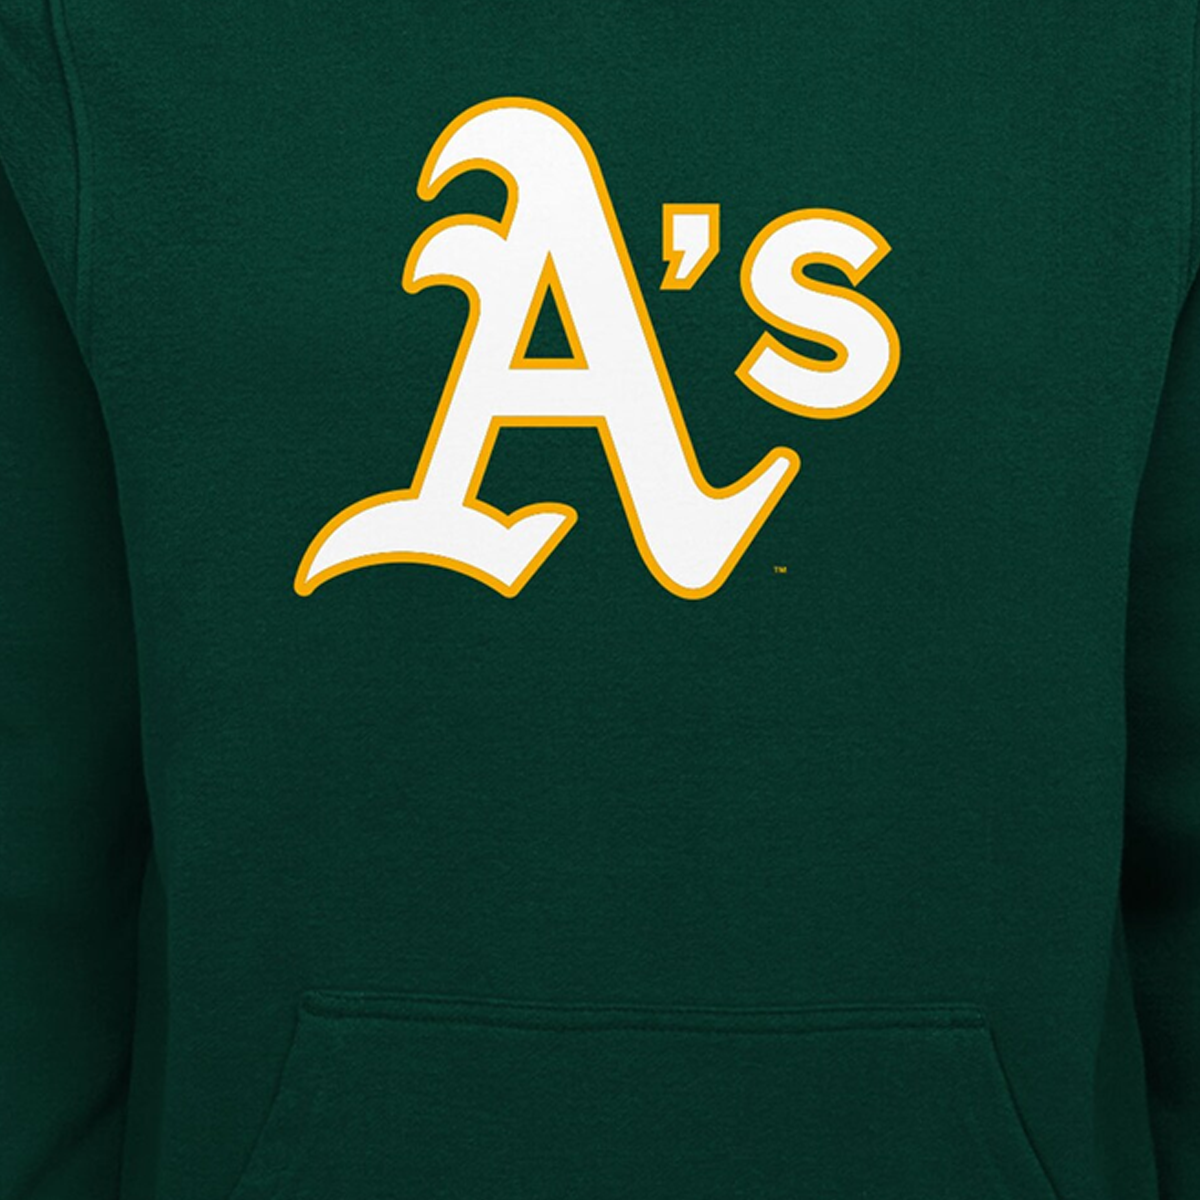 Youth A's Logo Hoodie alternate view